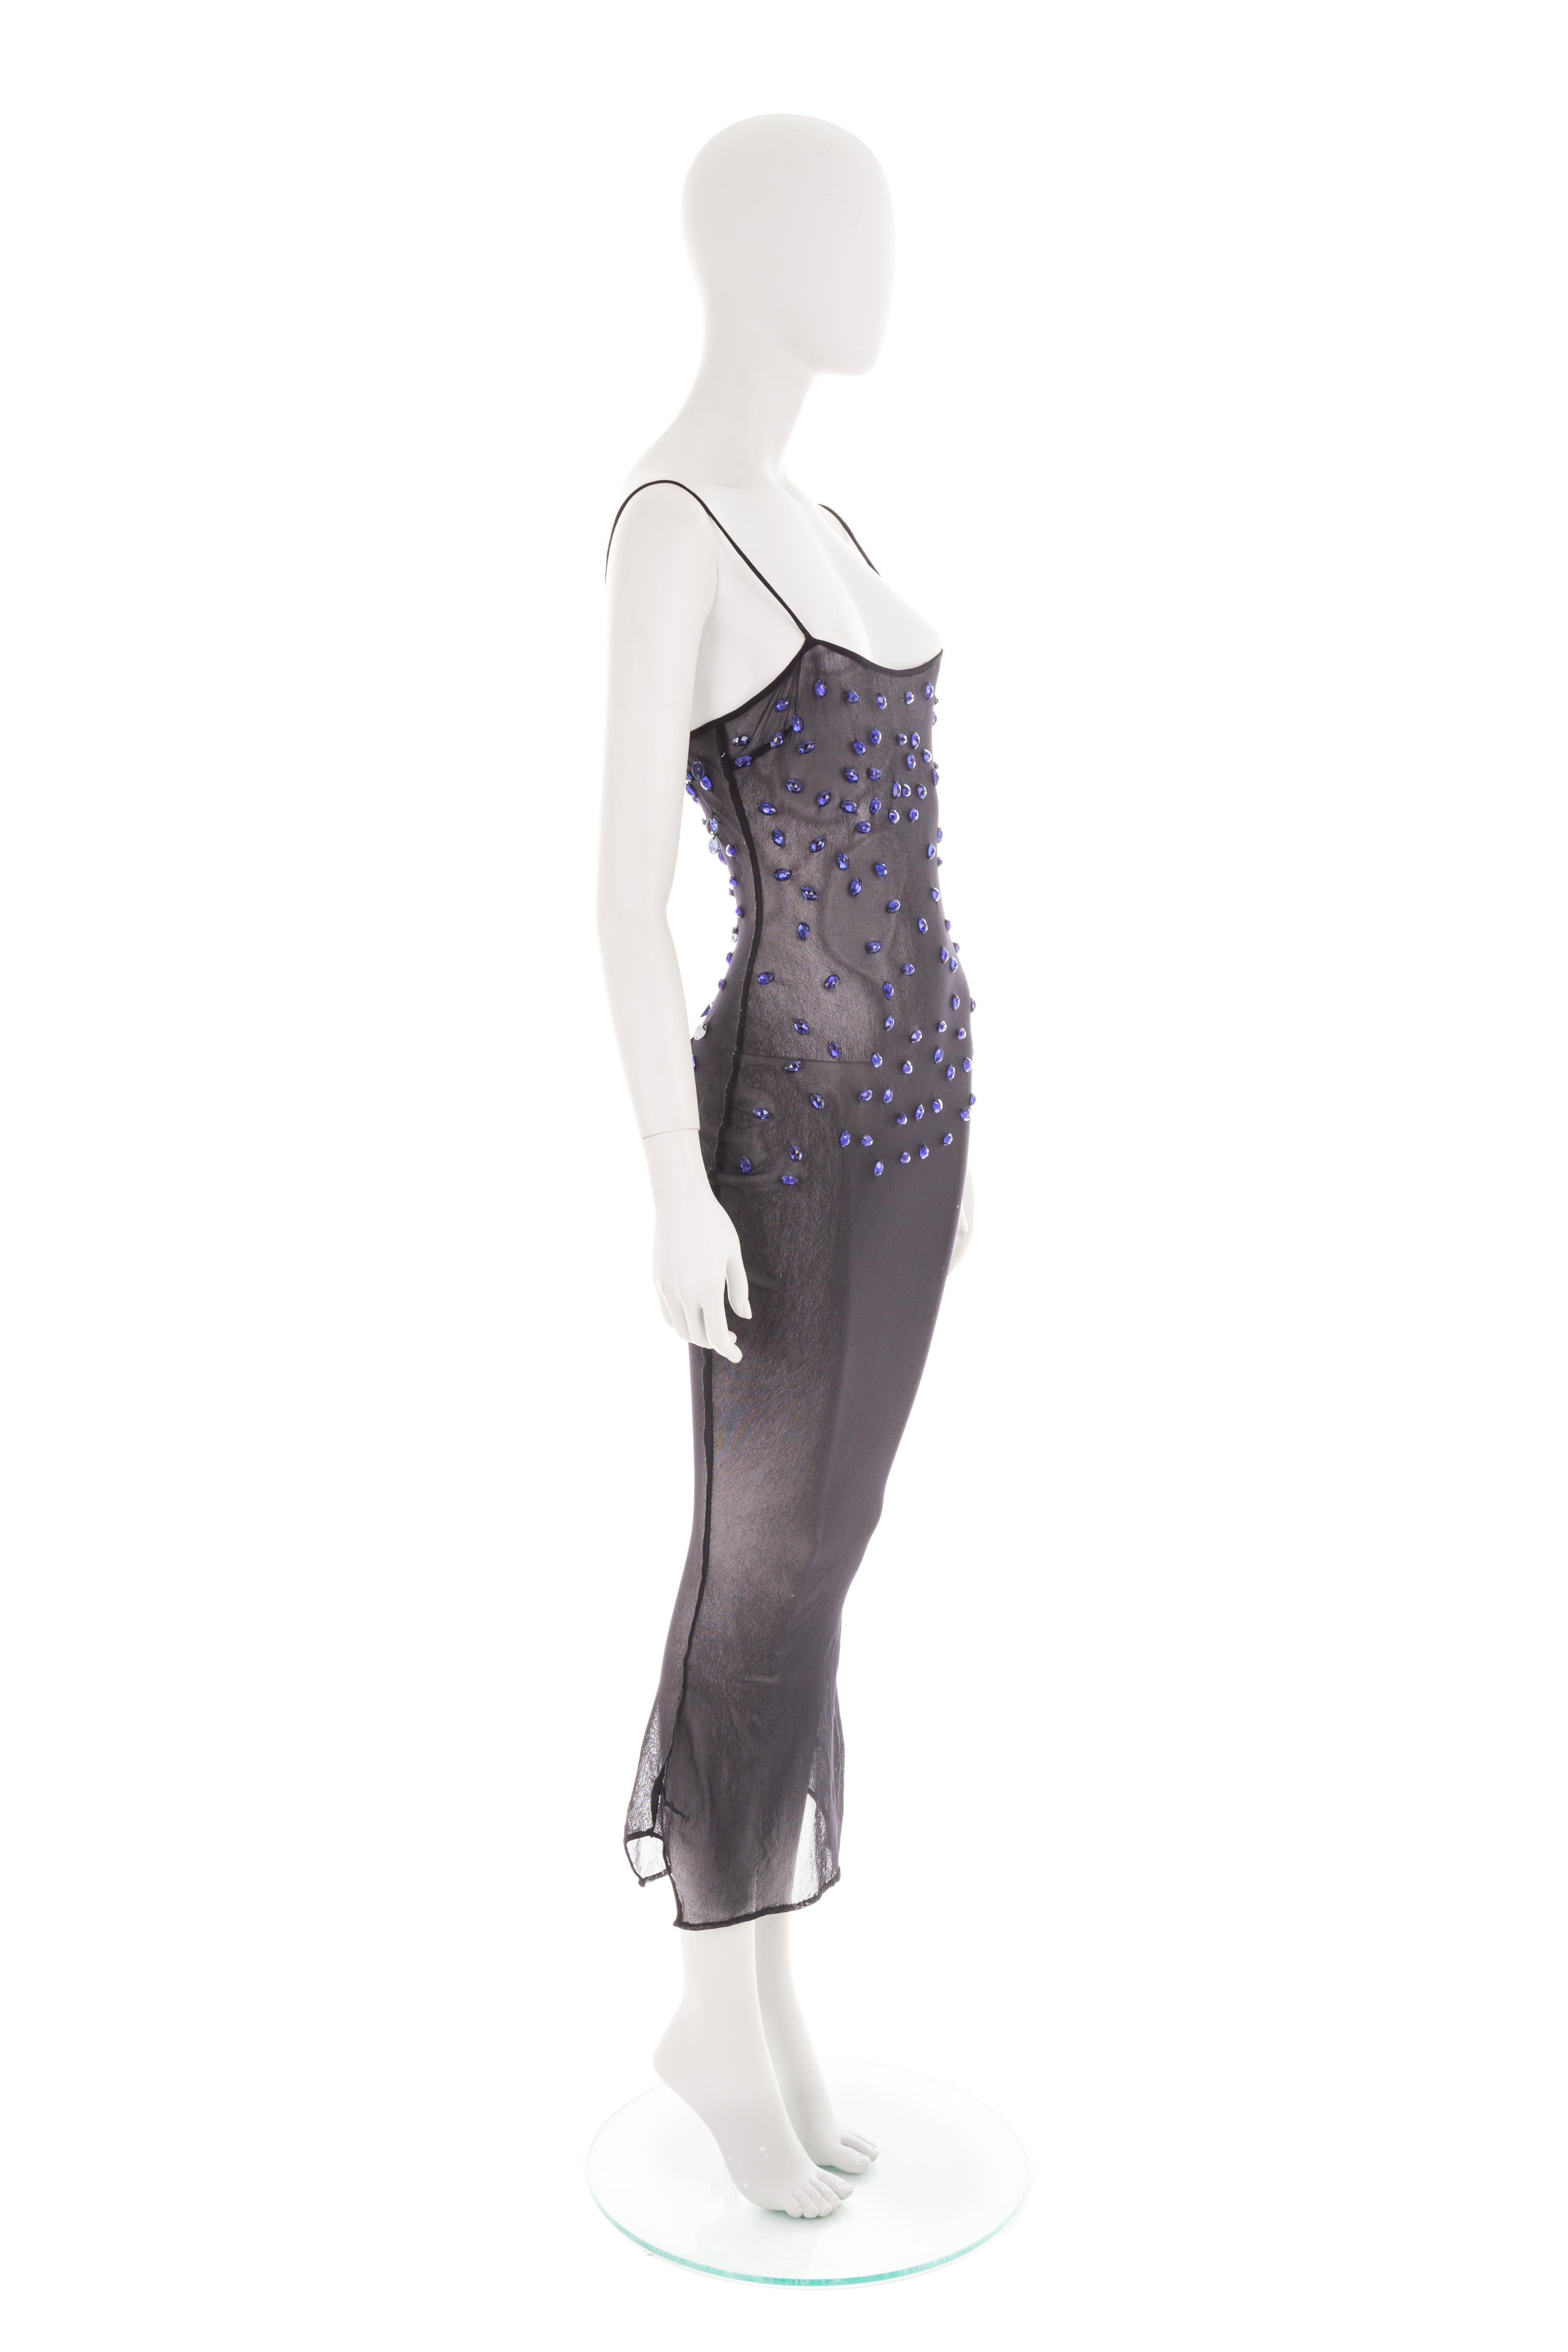 Dolce & Gabbana S/S 1998 blue mesh crystal embellished dress In Excellent Condition For Sale In Rome, IT